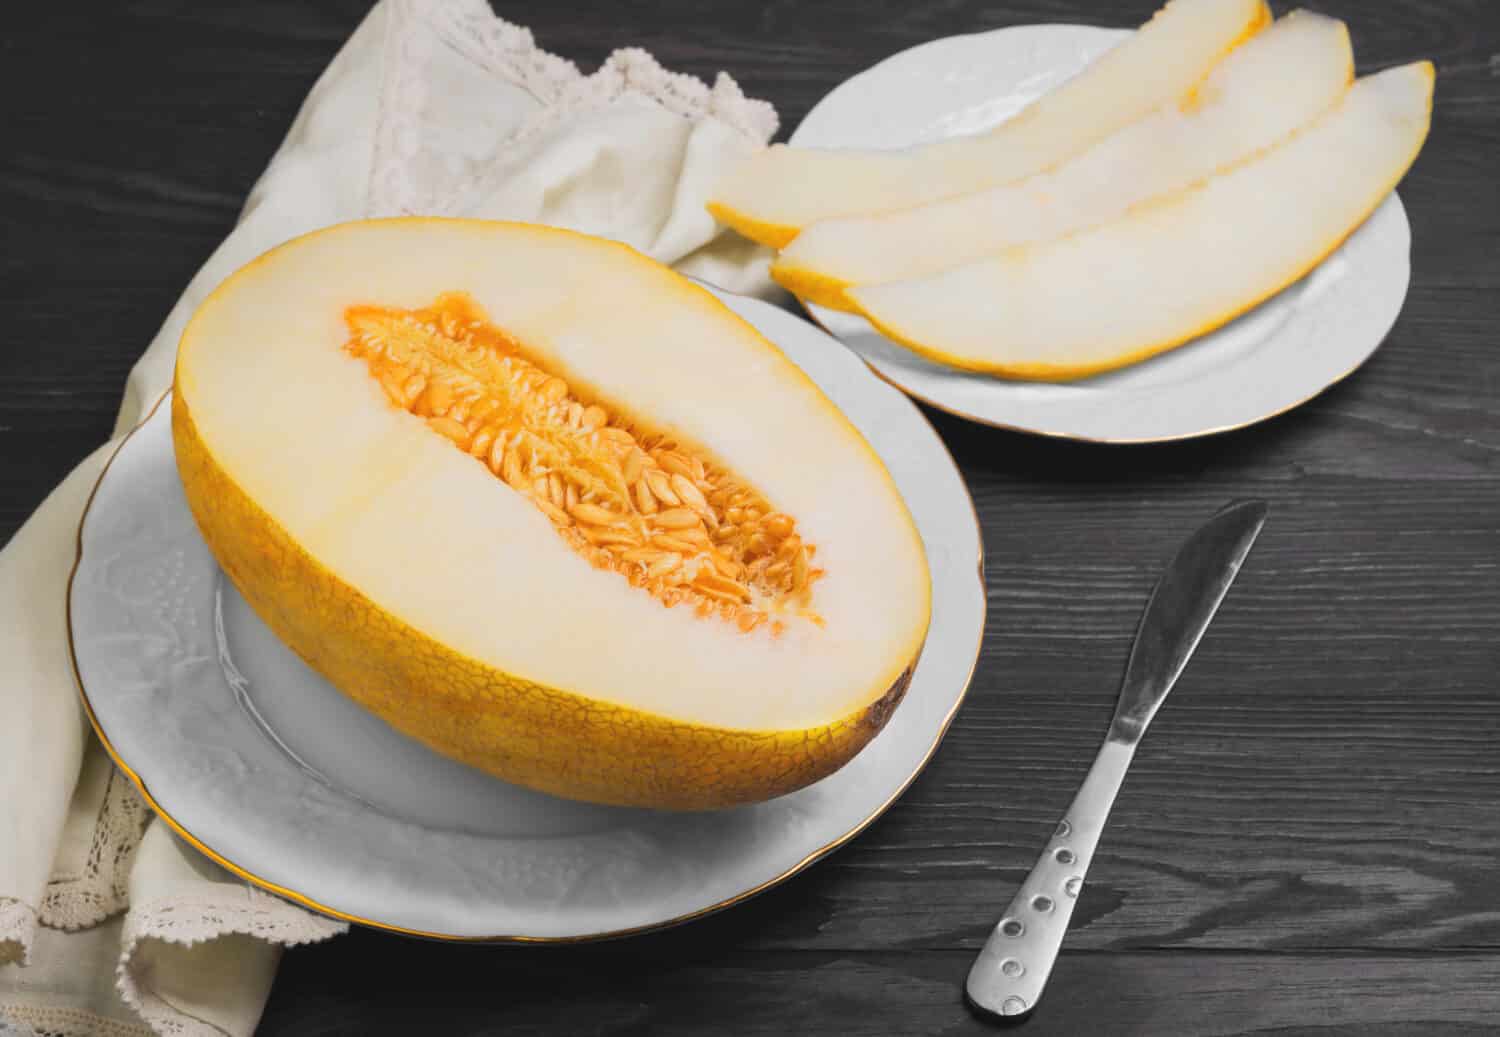 Fresh ripe yellow melon on white porcelain plate, three pieces of sliced melon, knife, cloth, dark brown wooden background